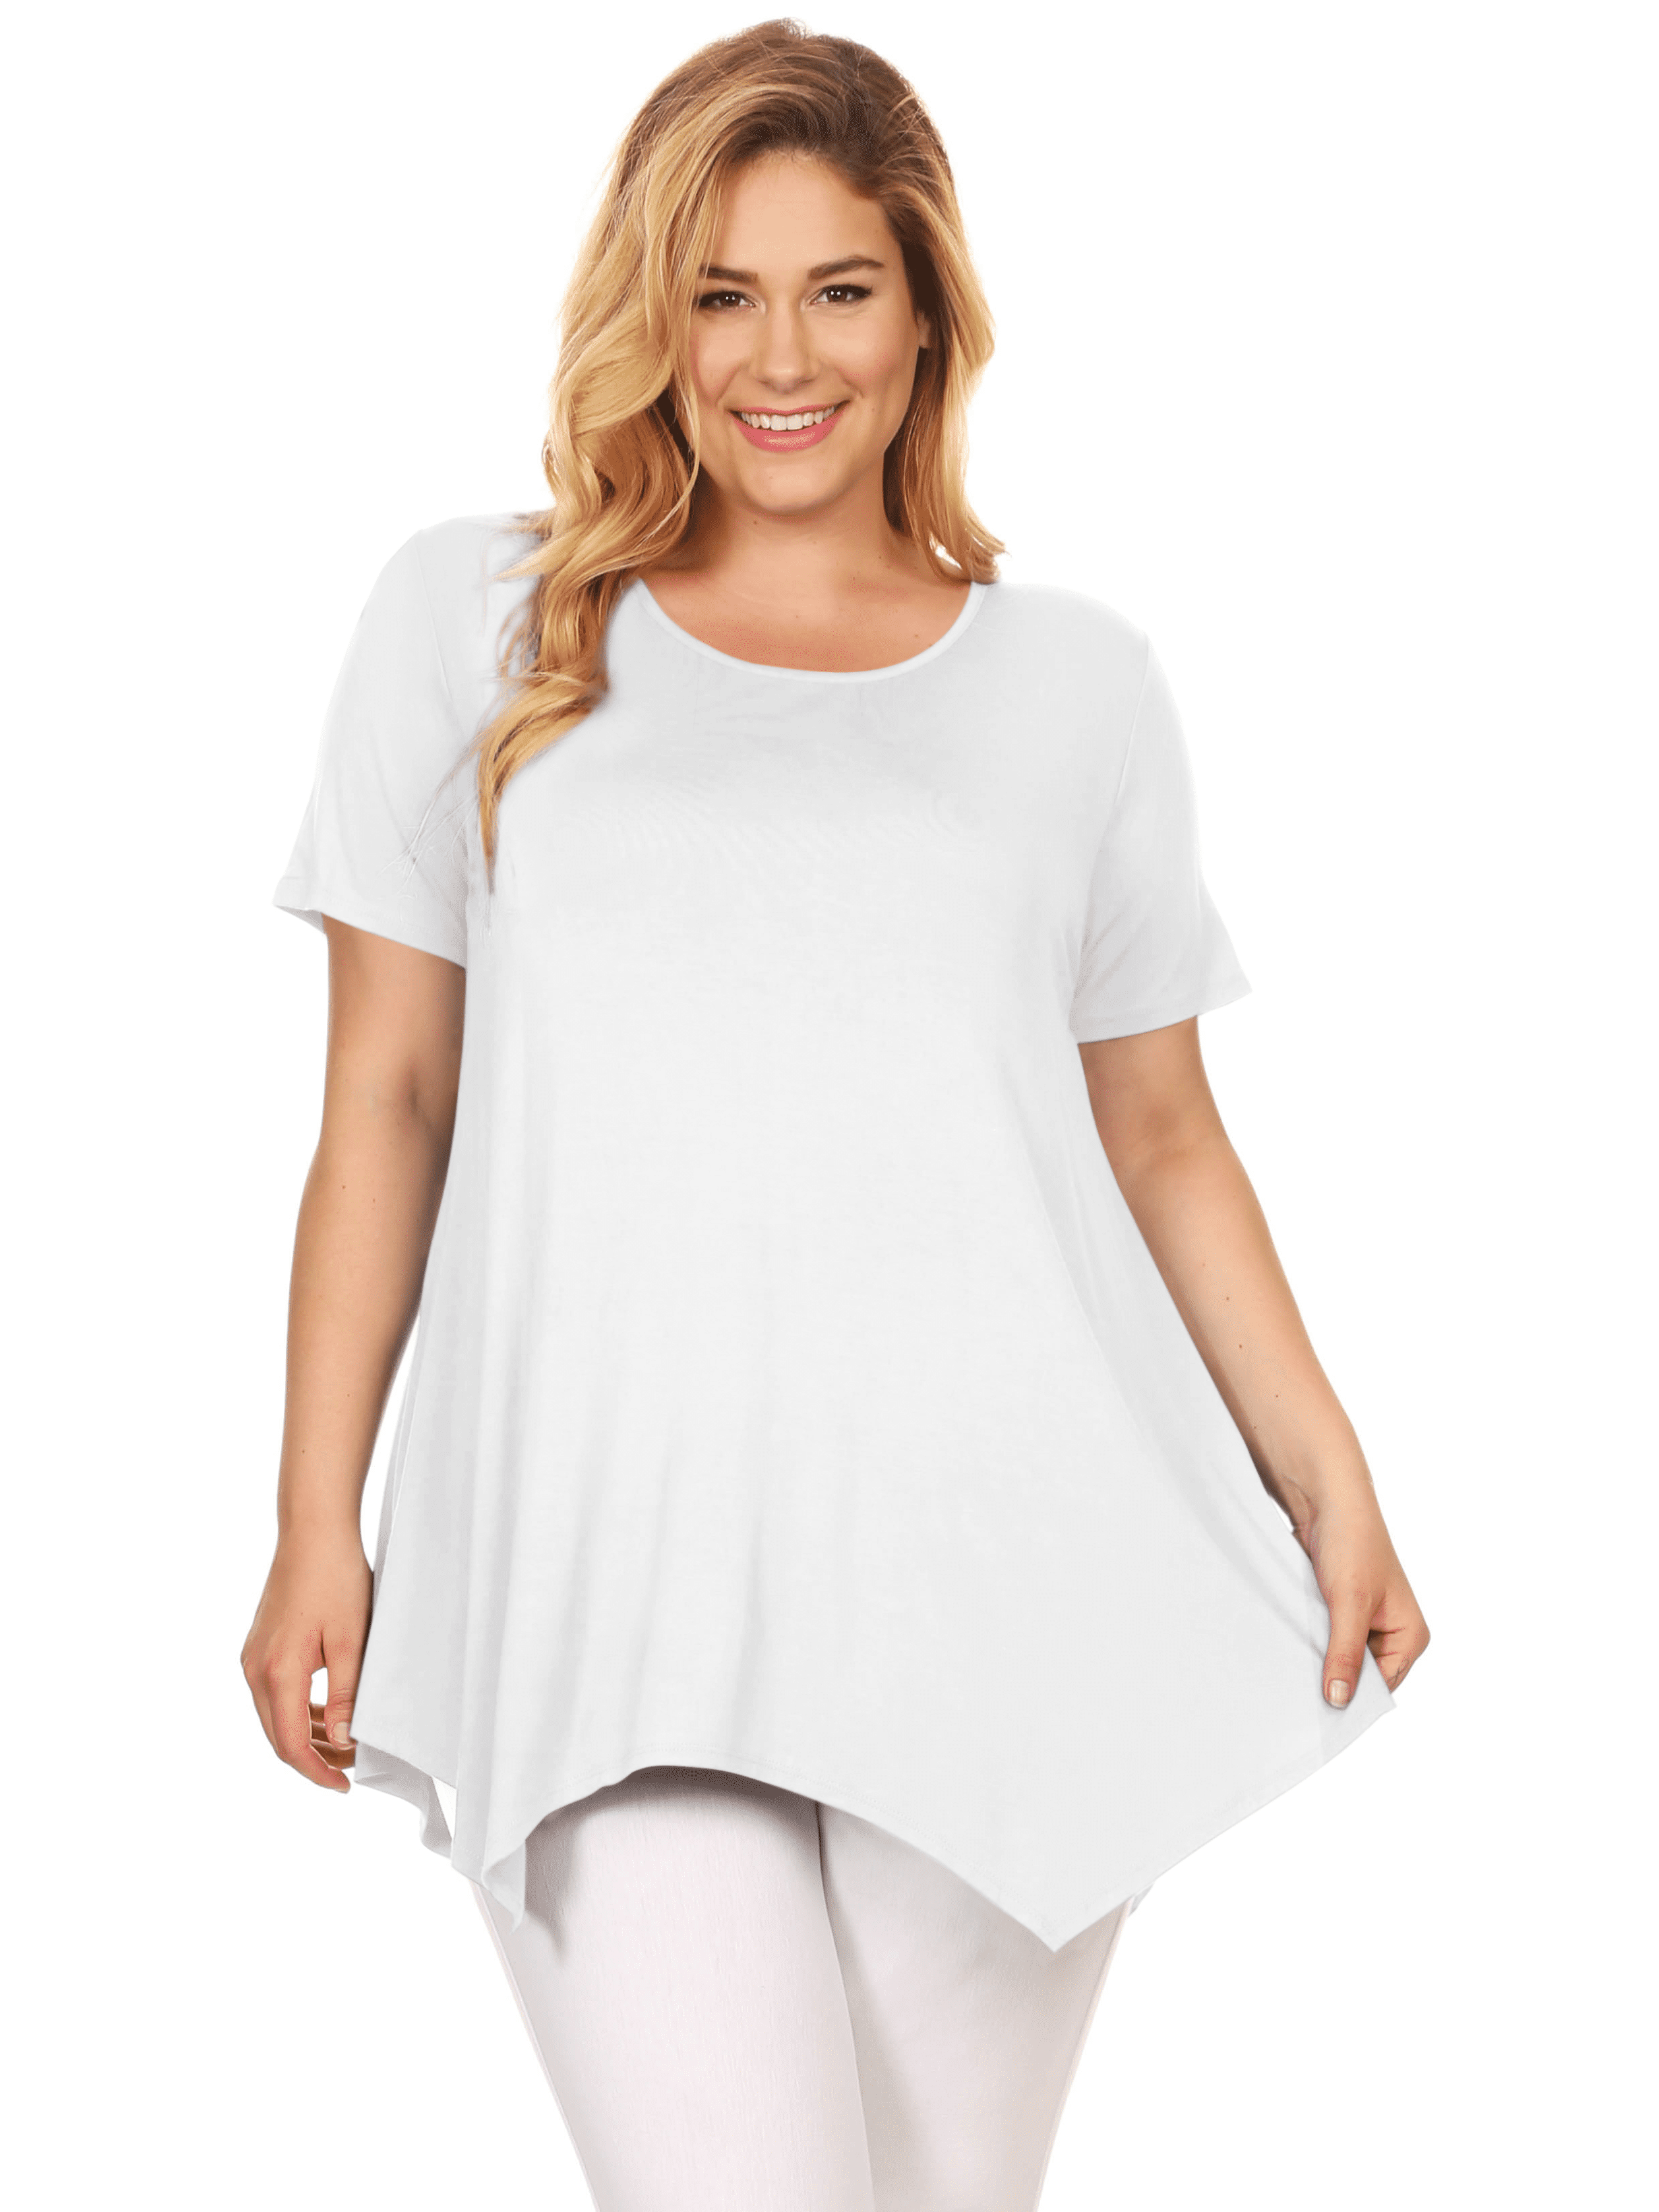 Plus Size Tops For Leggings  International Society of Precision